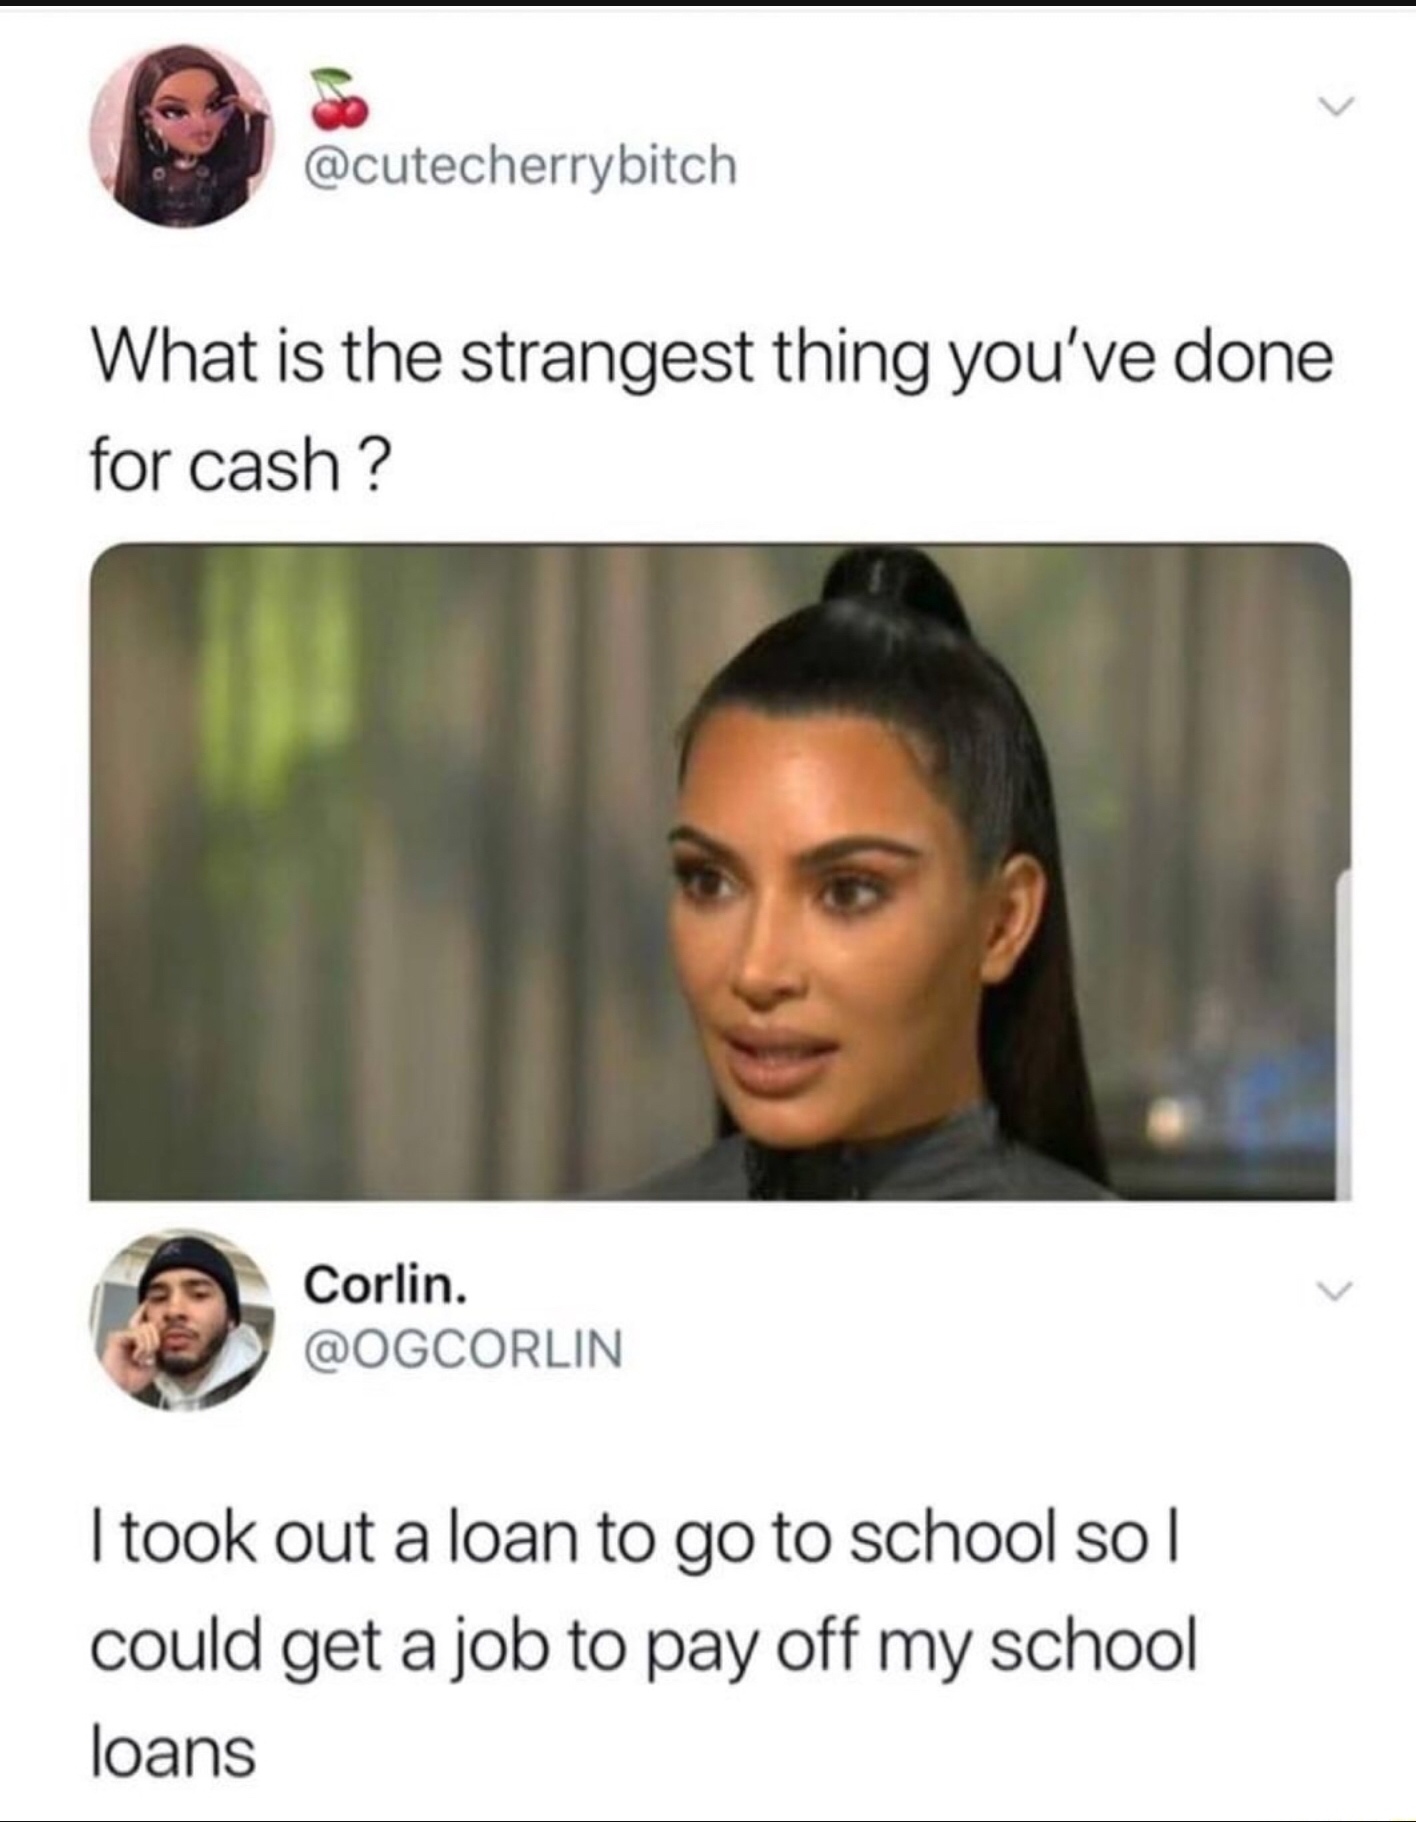 what's the strangest thing you ve done - What is the strangest thing you've done for cash? Corlin. I took out a loan to go to school so|| could get a job to pay off my school loans